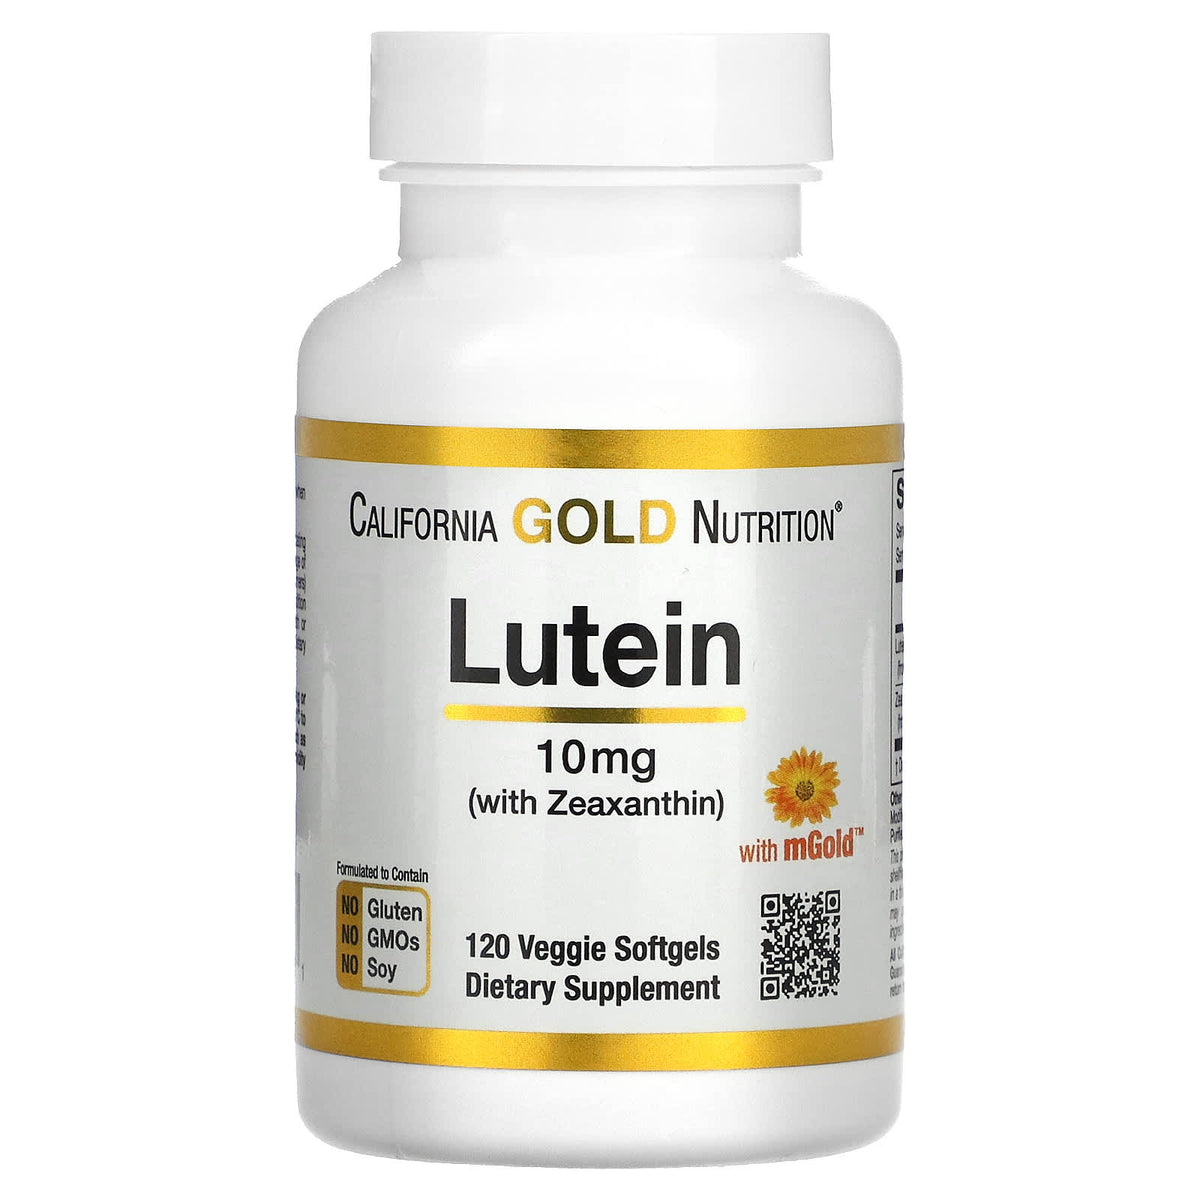 California Gold Nutrition Lutein with Zeaxanthin 10mg Softgels, 120ct